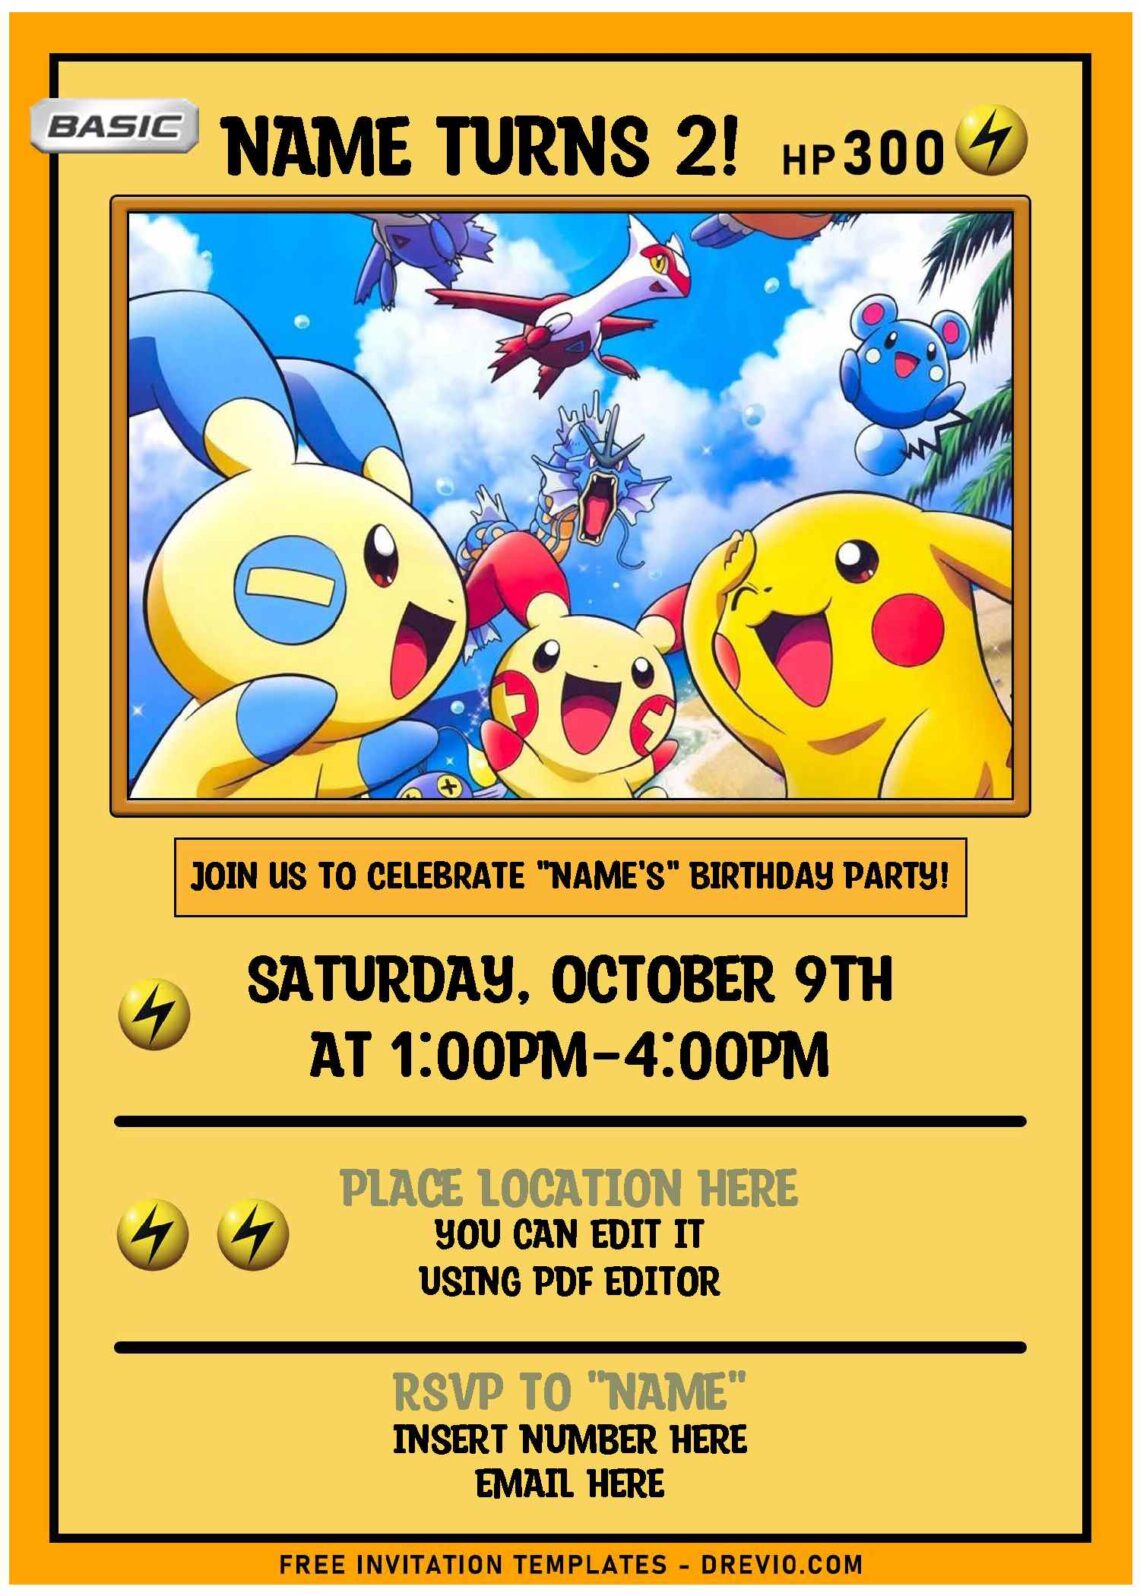 (Free Editable PDF) Cute And Awesome Pokemon Kids Birthday Party Invitation Templates with Pikachu and friends